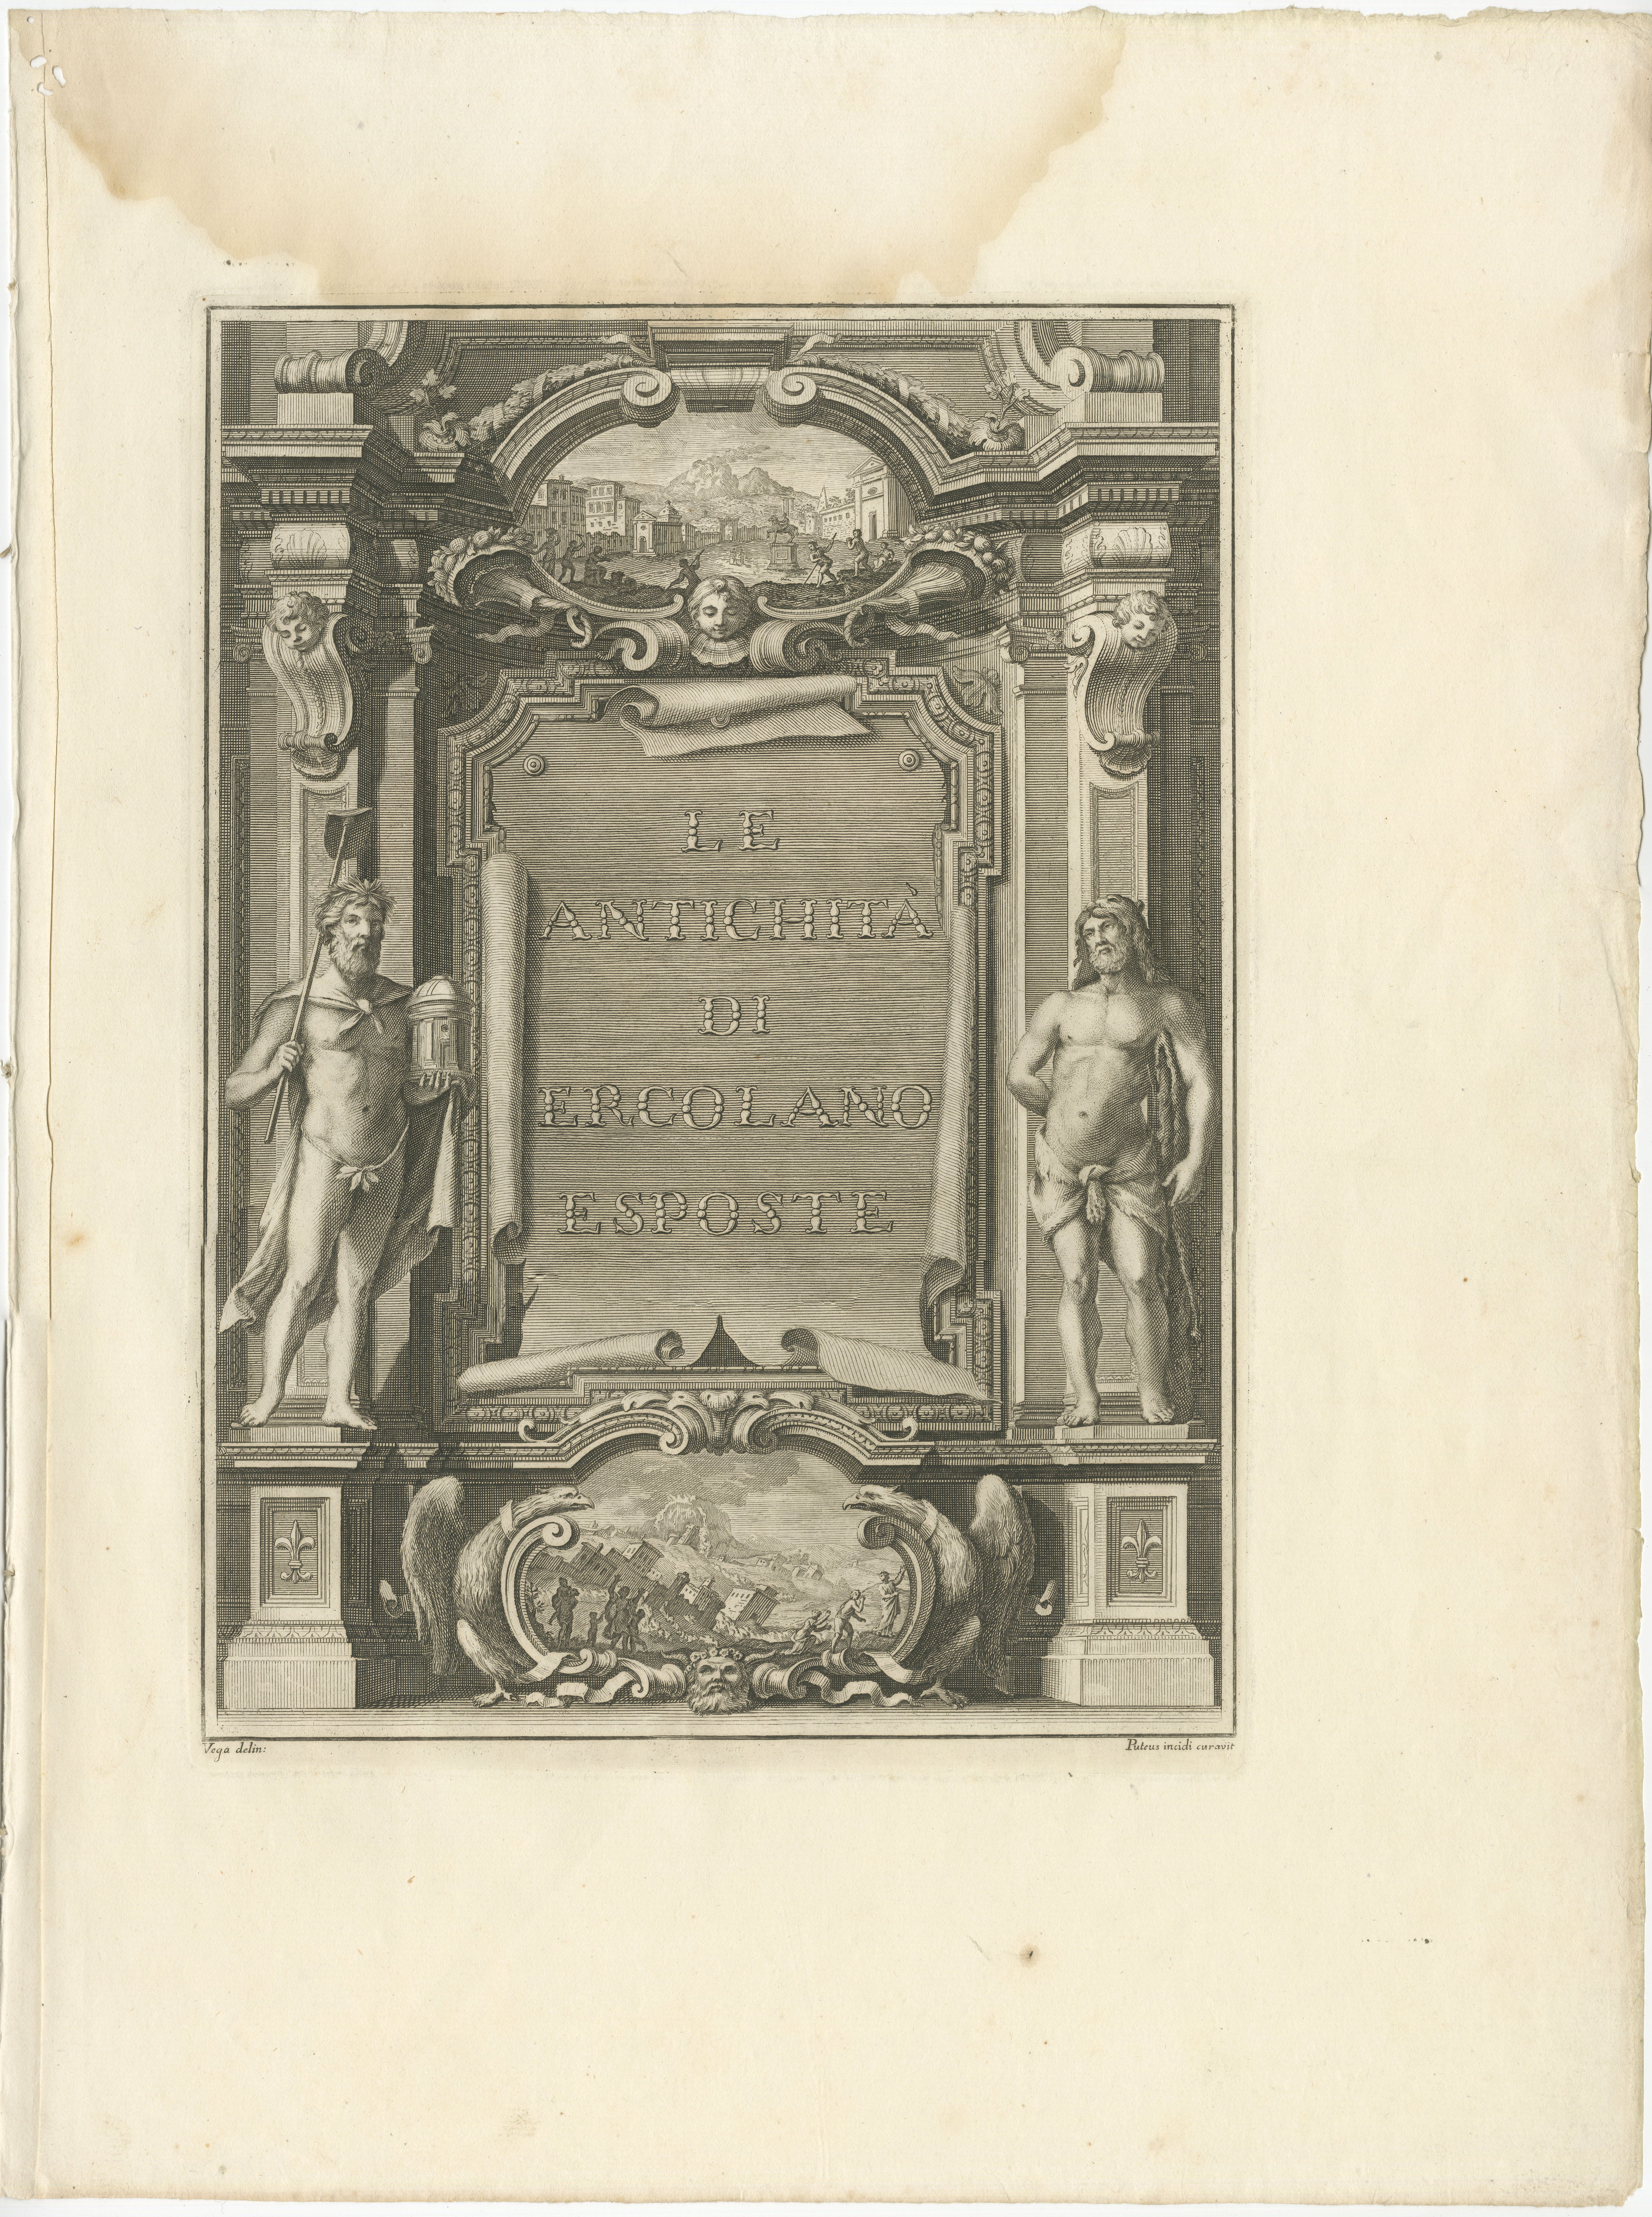 This is the frontispiece of the first volume of 